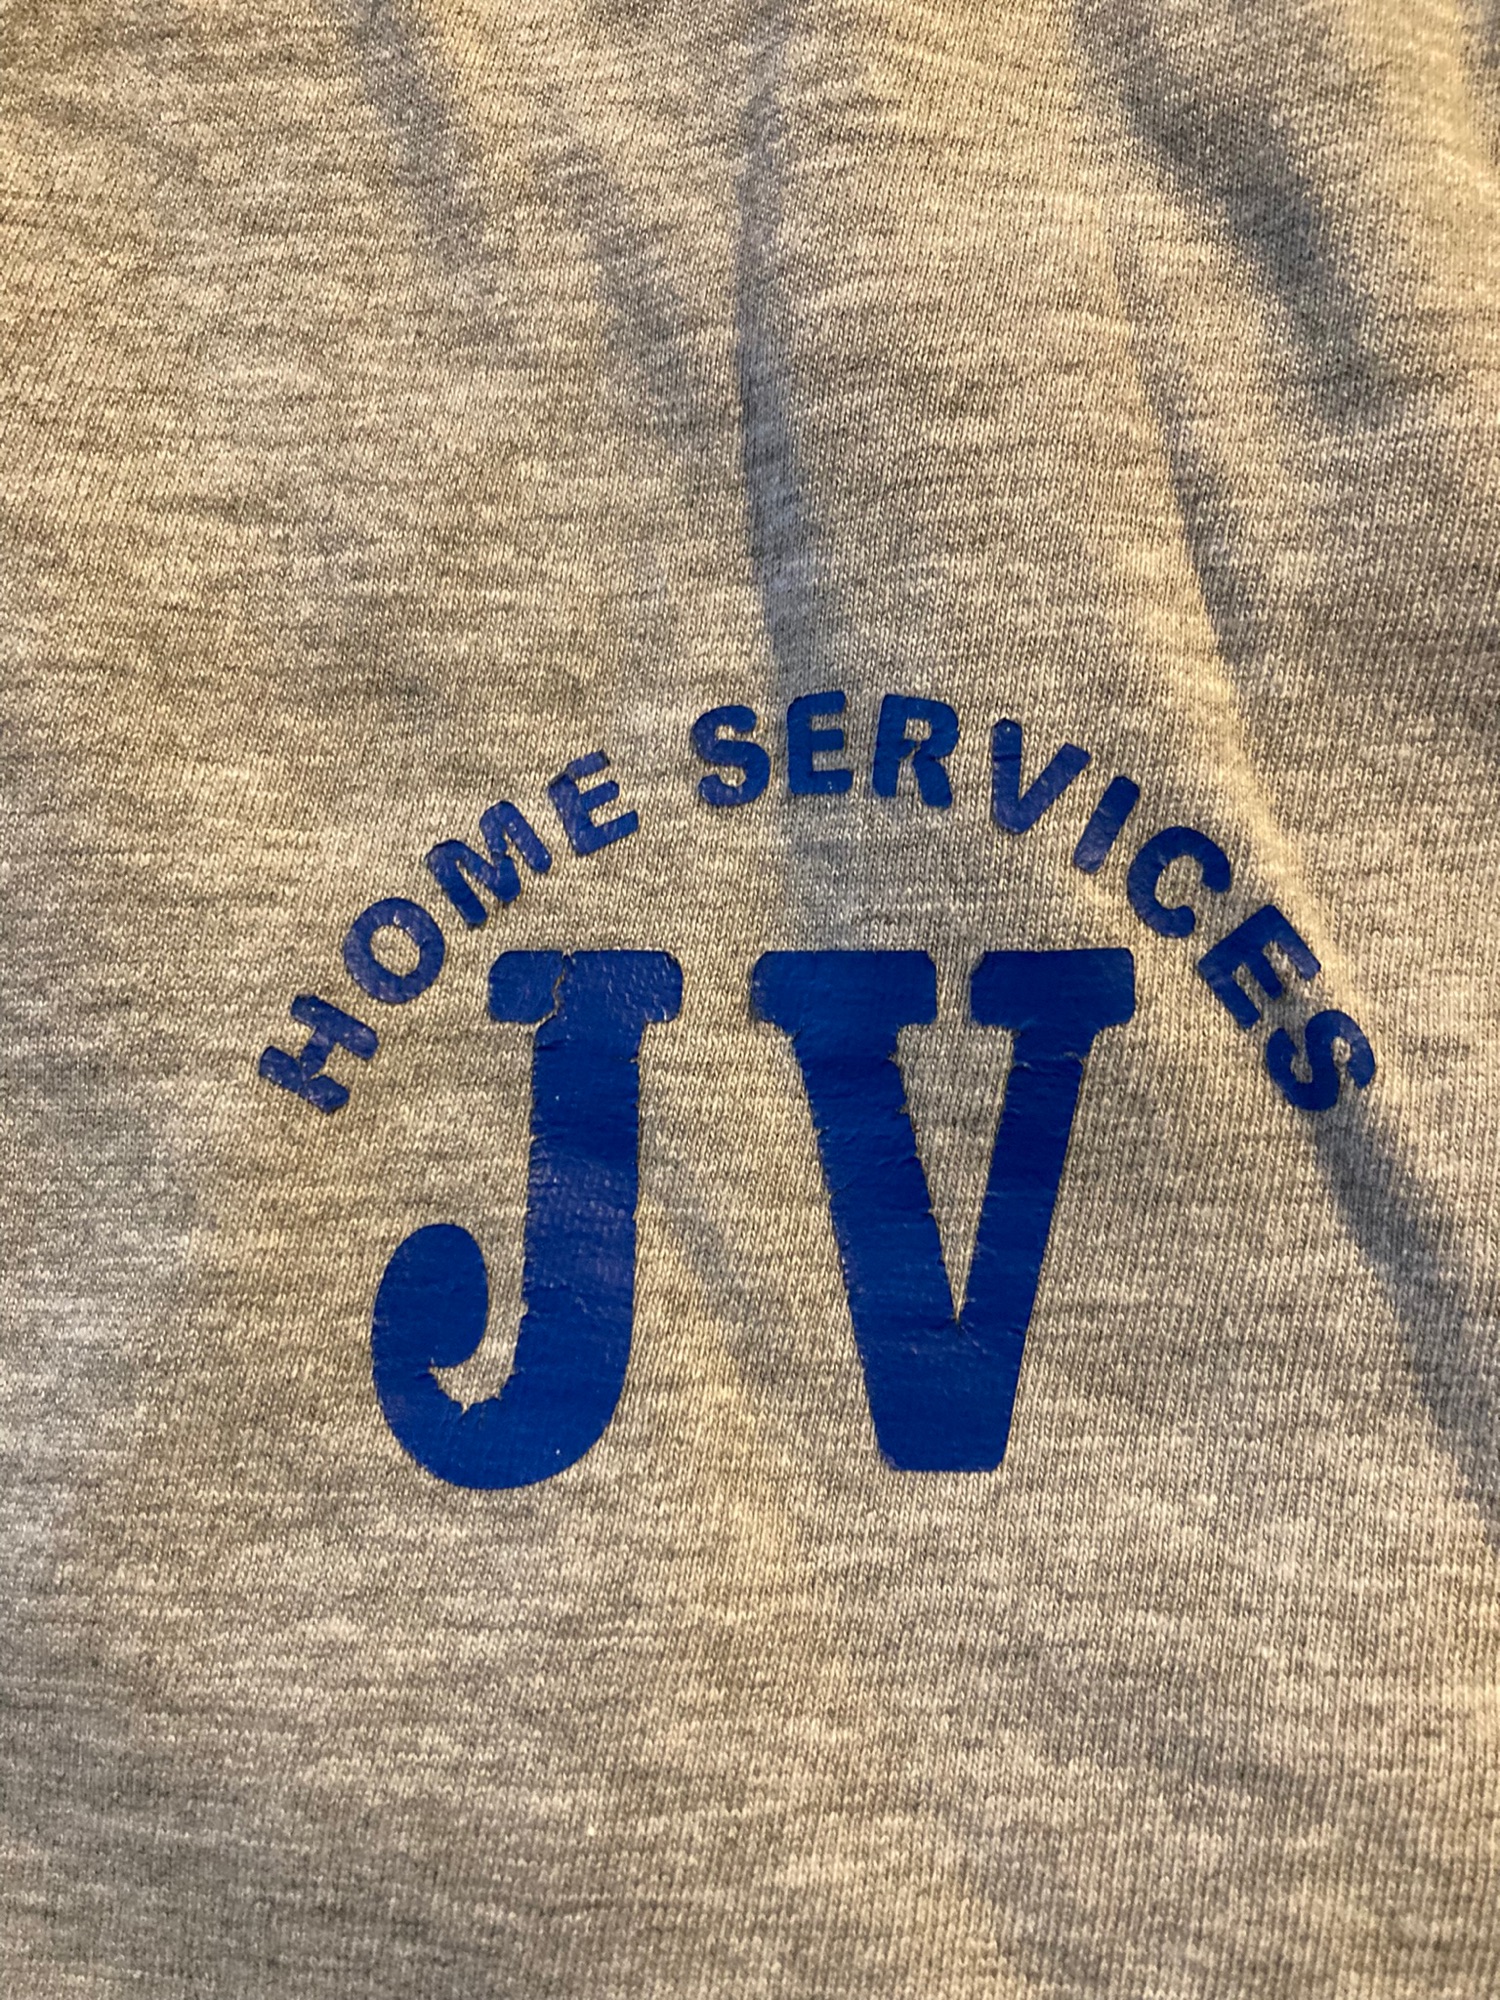 JV Home Services - Unlicensed Contractor Logo